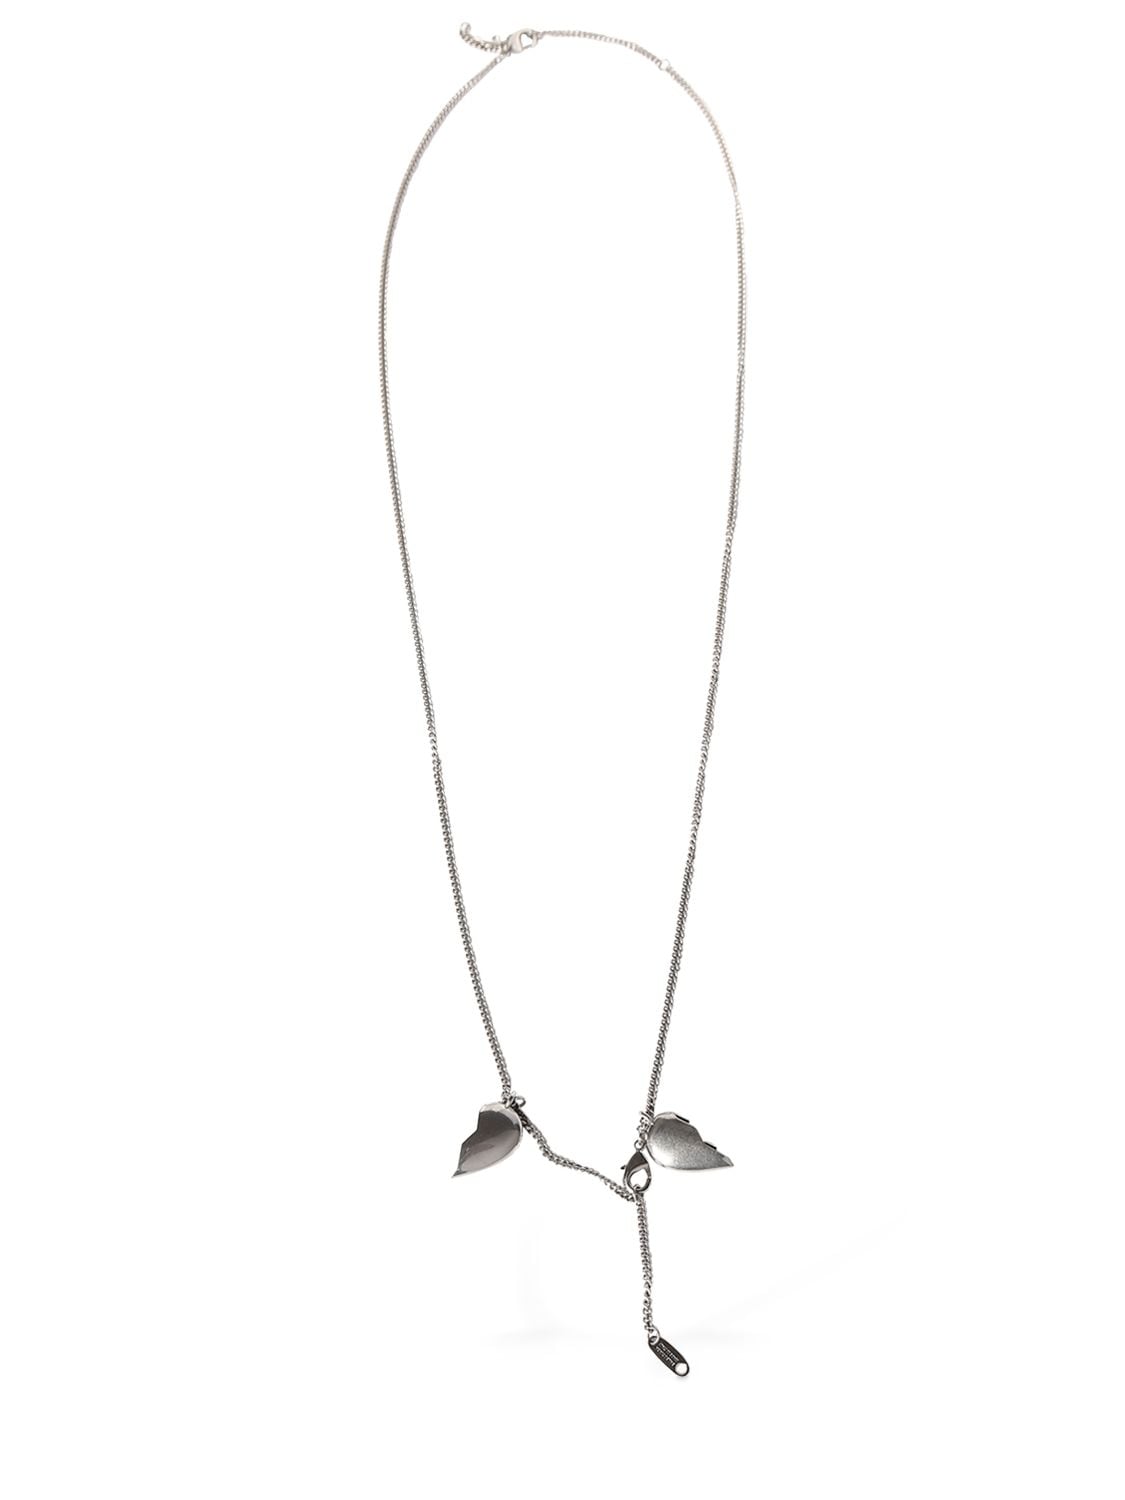 Lovelock Brass Necklace – WOMEN > JEWELRY & WATCHES > NECKLACES